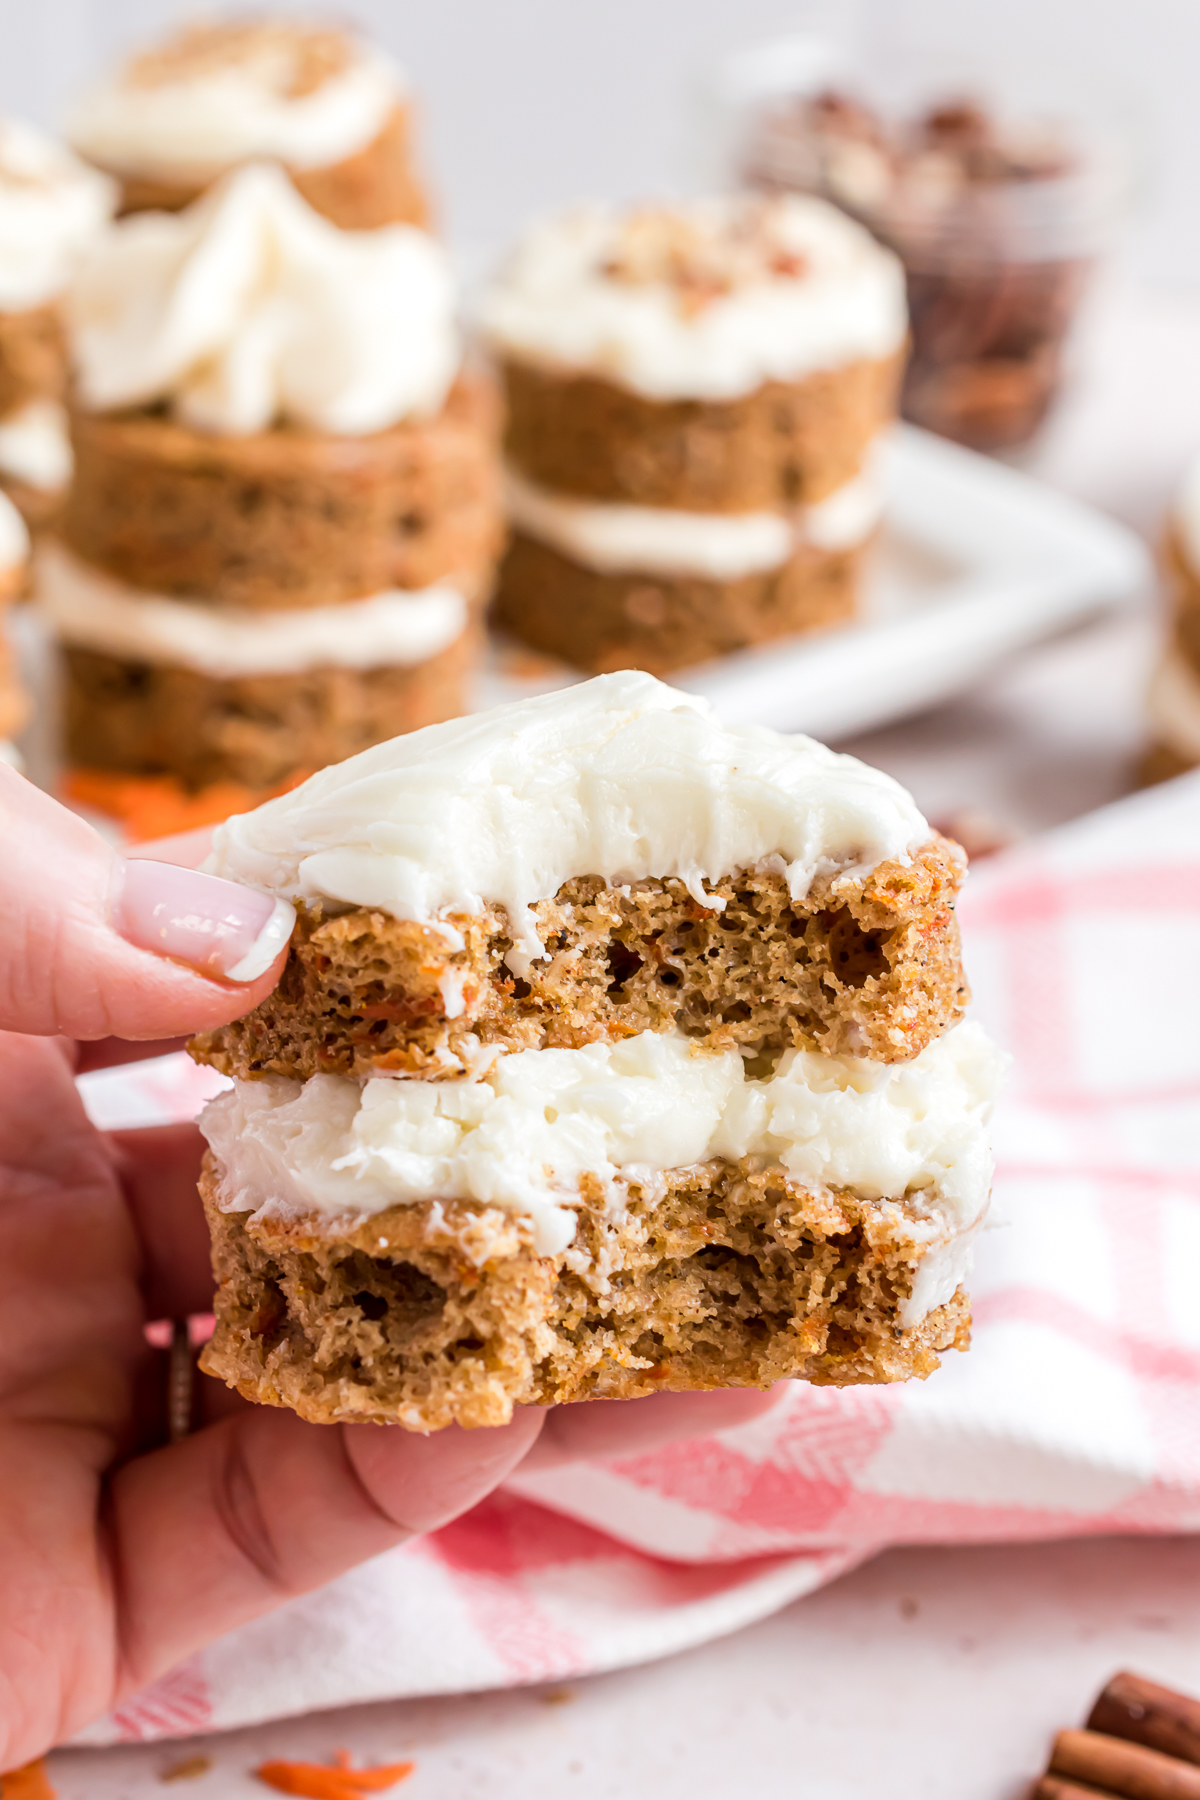 A mini carrot cake with a bite taken out of it showing the texture of the cakes and the icing in between the layers.